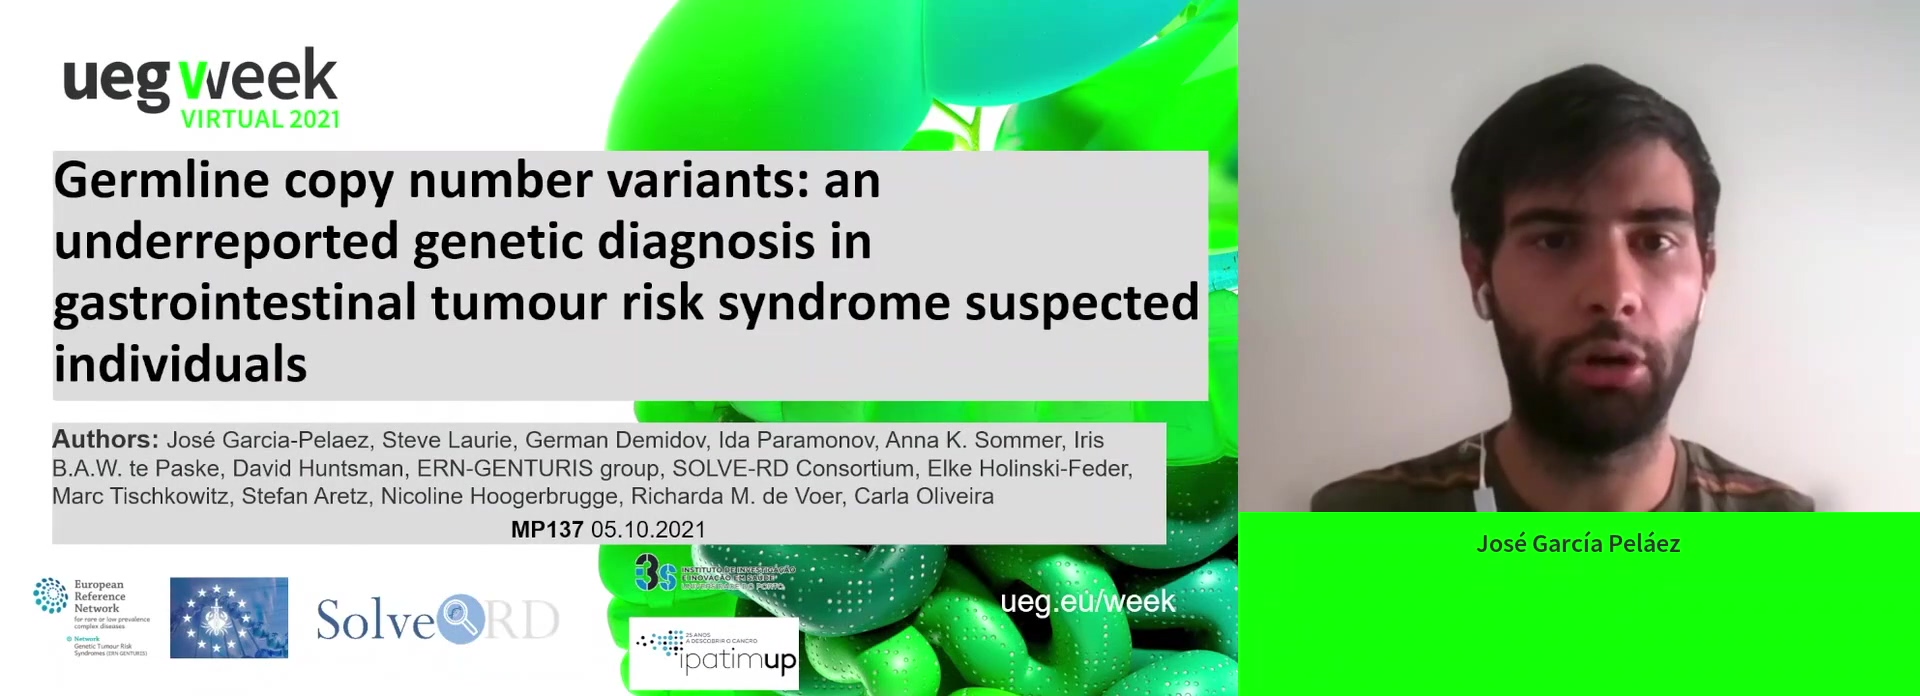 GERMLINE COPY NUMBER VARIANTS: AN UNDERREPORTED GENETIC DIAGNOSIS IN GASTROINTESTINAL TUMOUR RISK SYNDROME SUSPECTED INDIVIDUALS